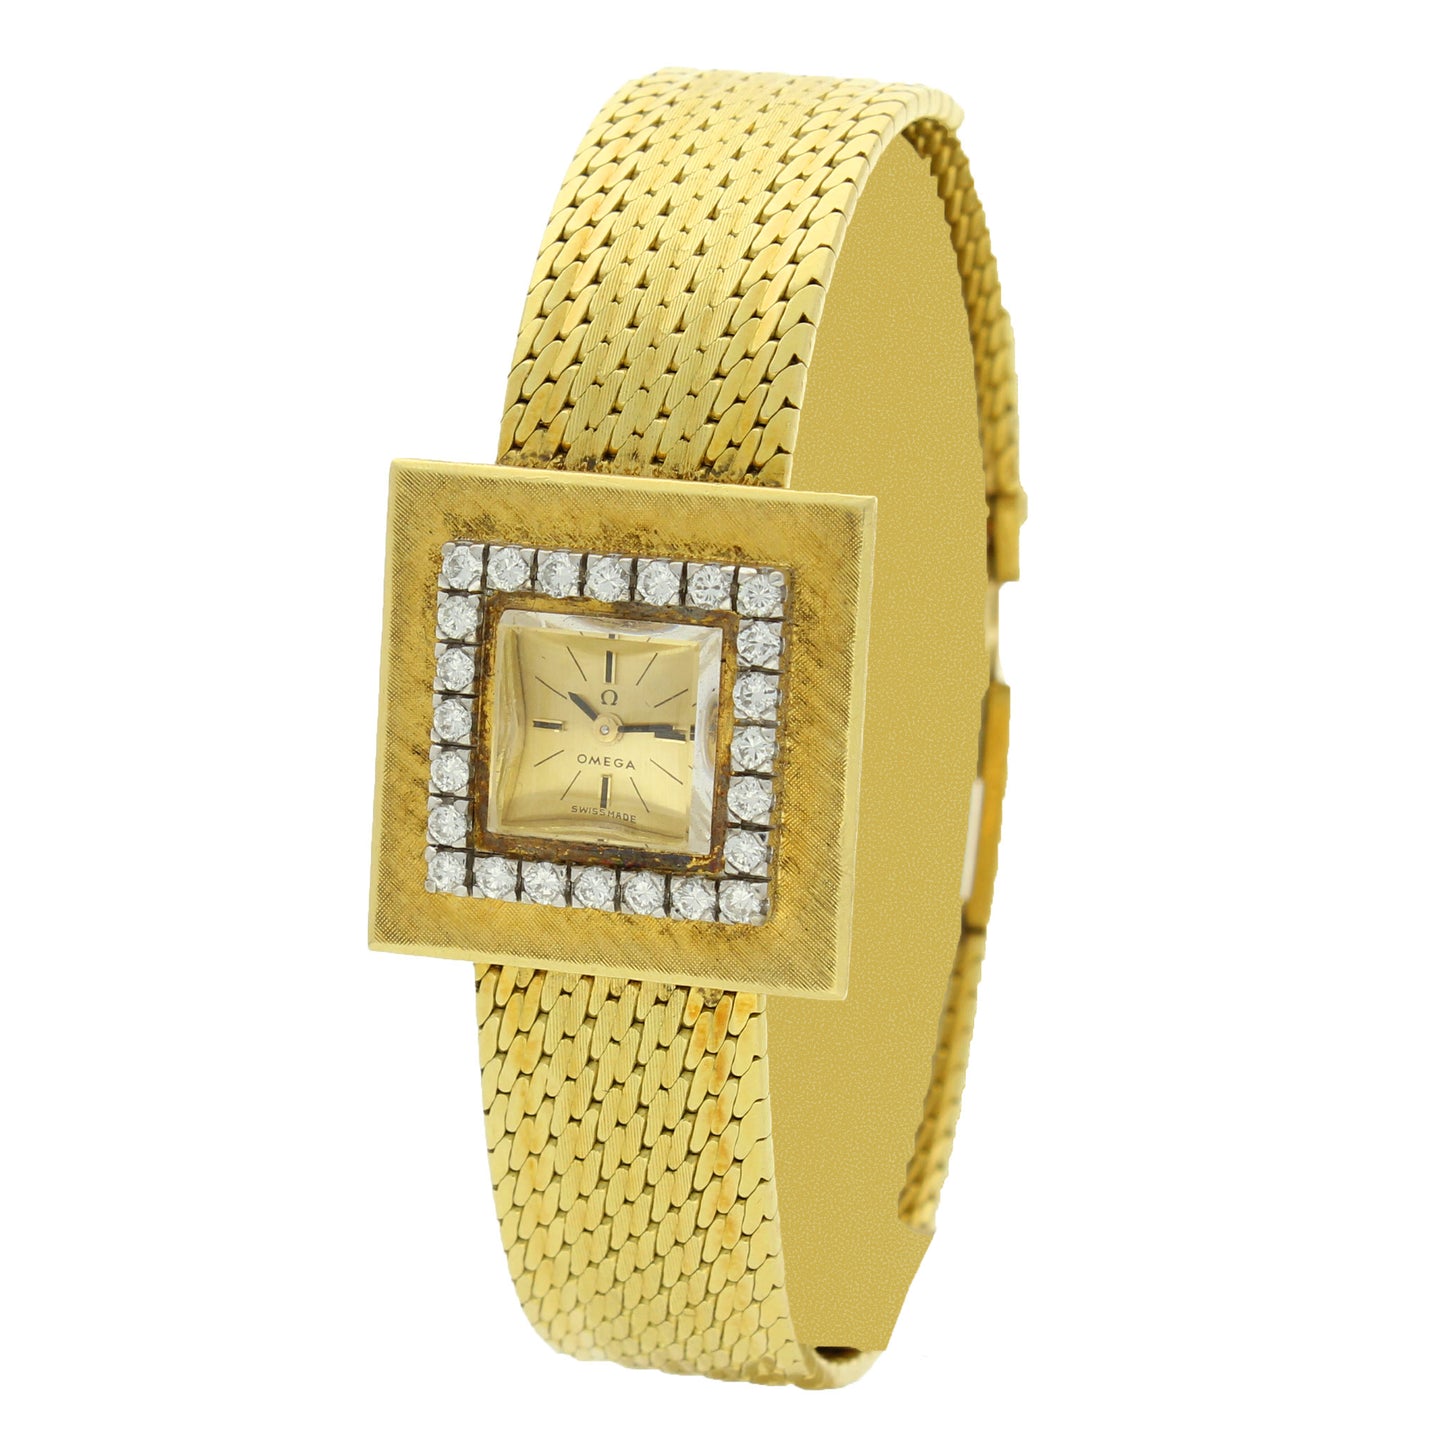 18ct yellow gold and diamond set square case bracelet watch. Made 1961